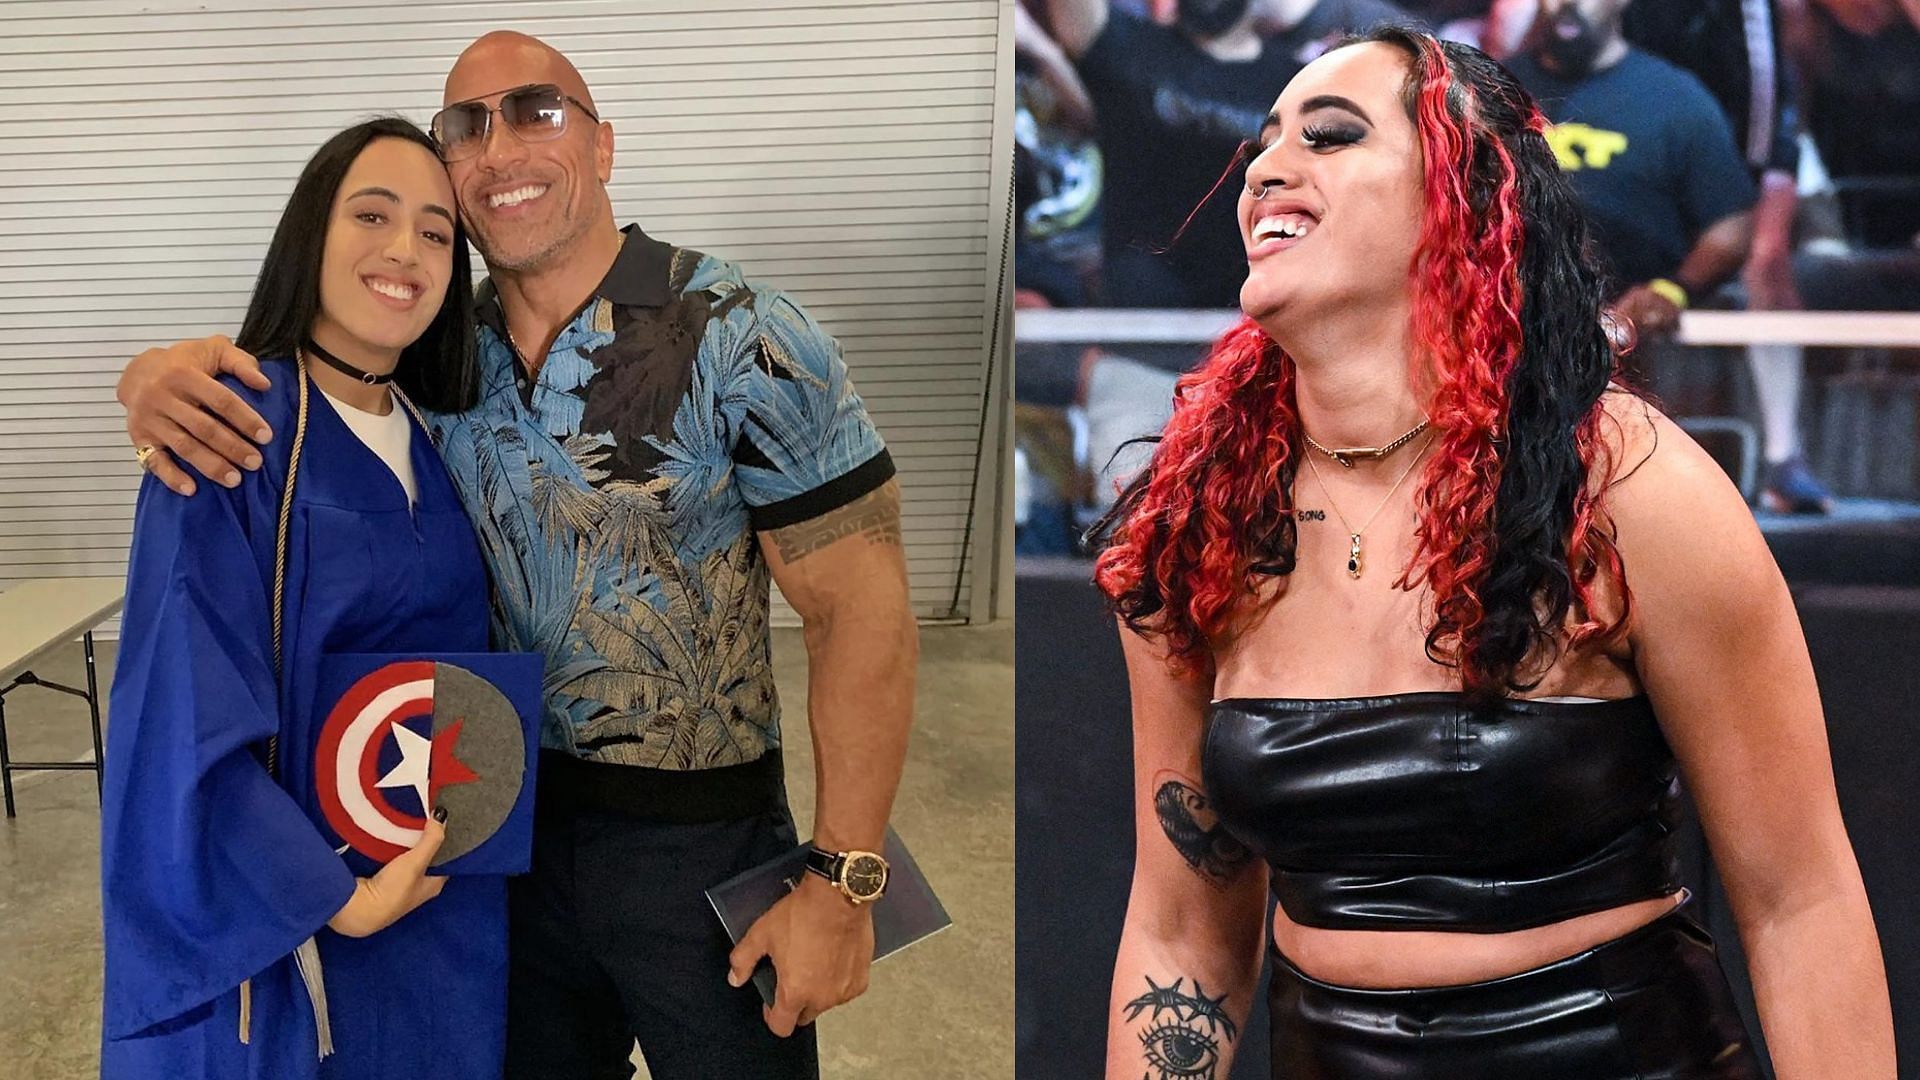 Dwayne Johnson Daughter: Why did Dwayne Johnson's daughter Ava issue a  stern warning to WWE fans? Turmoil explained